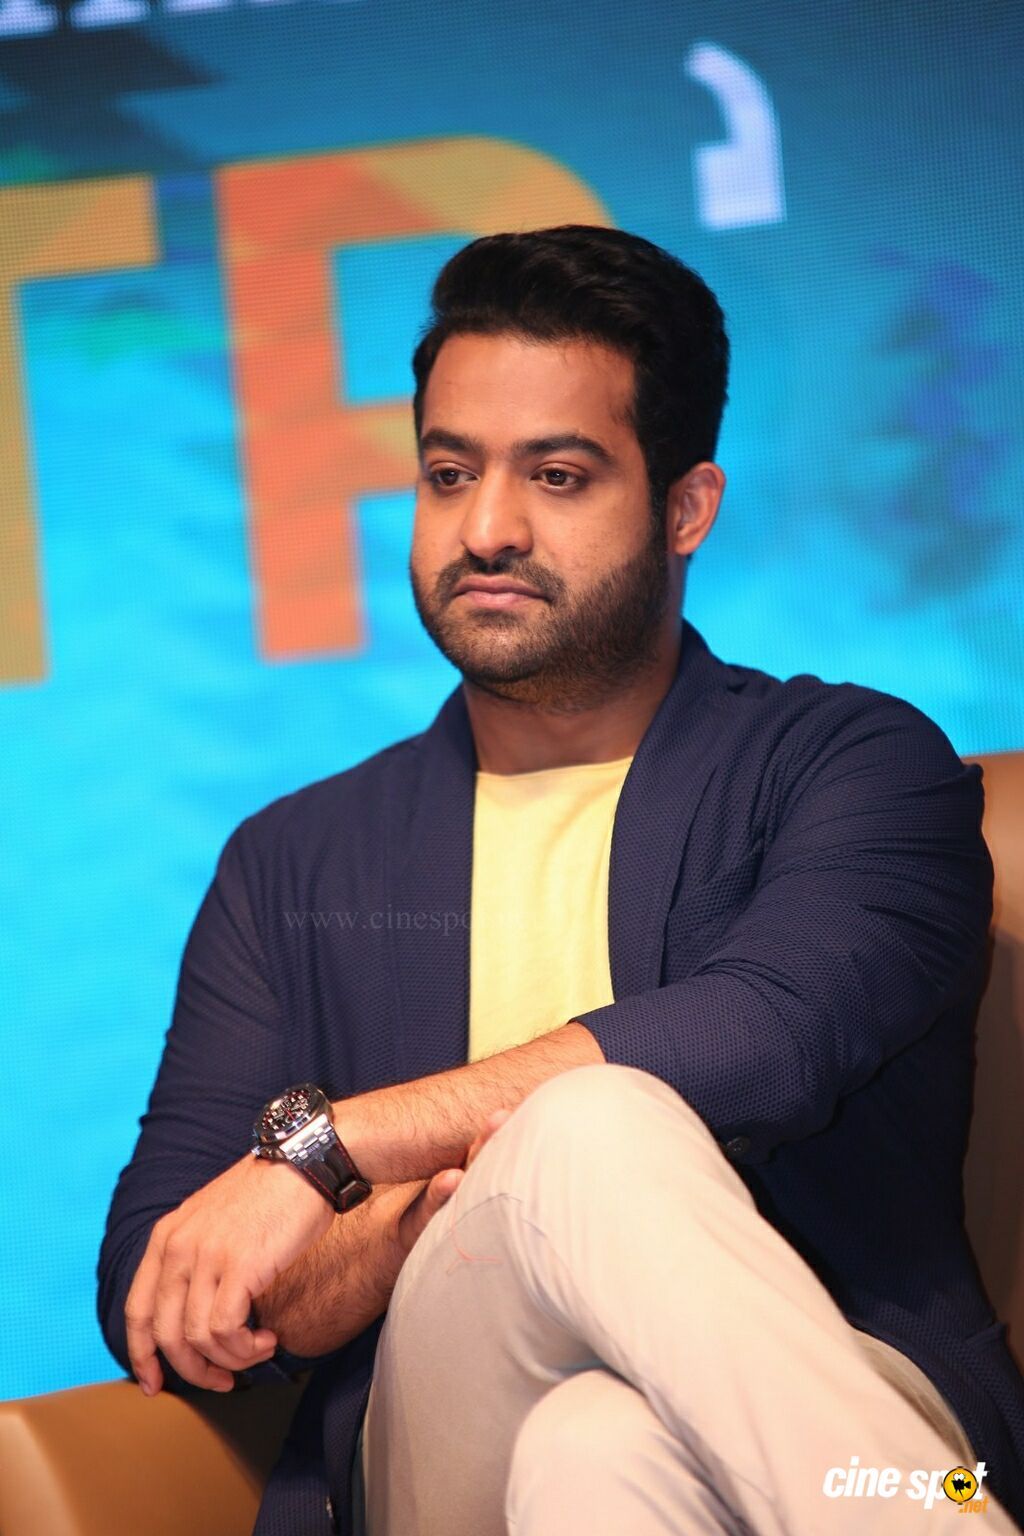 NTR Wallpapers 2018 for PC - How to Install on Windows PC, Mac